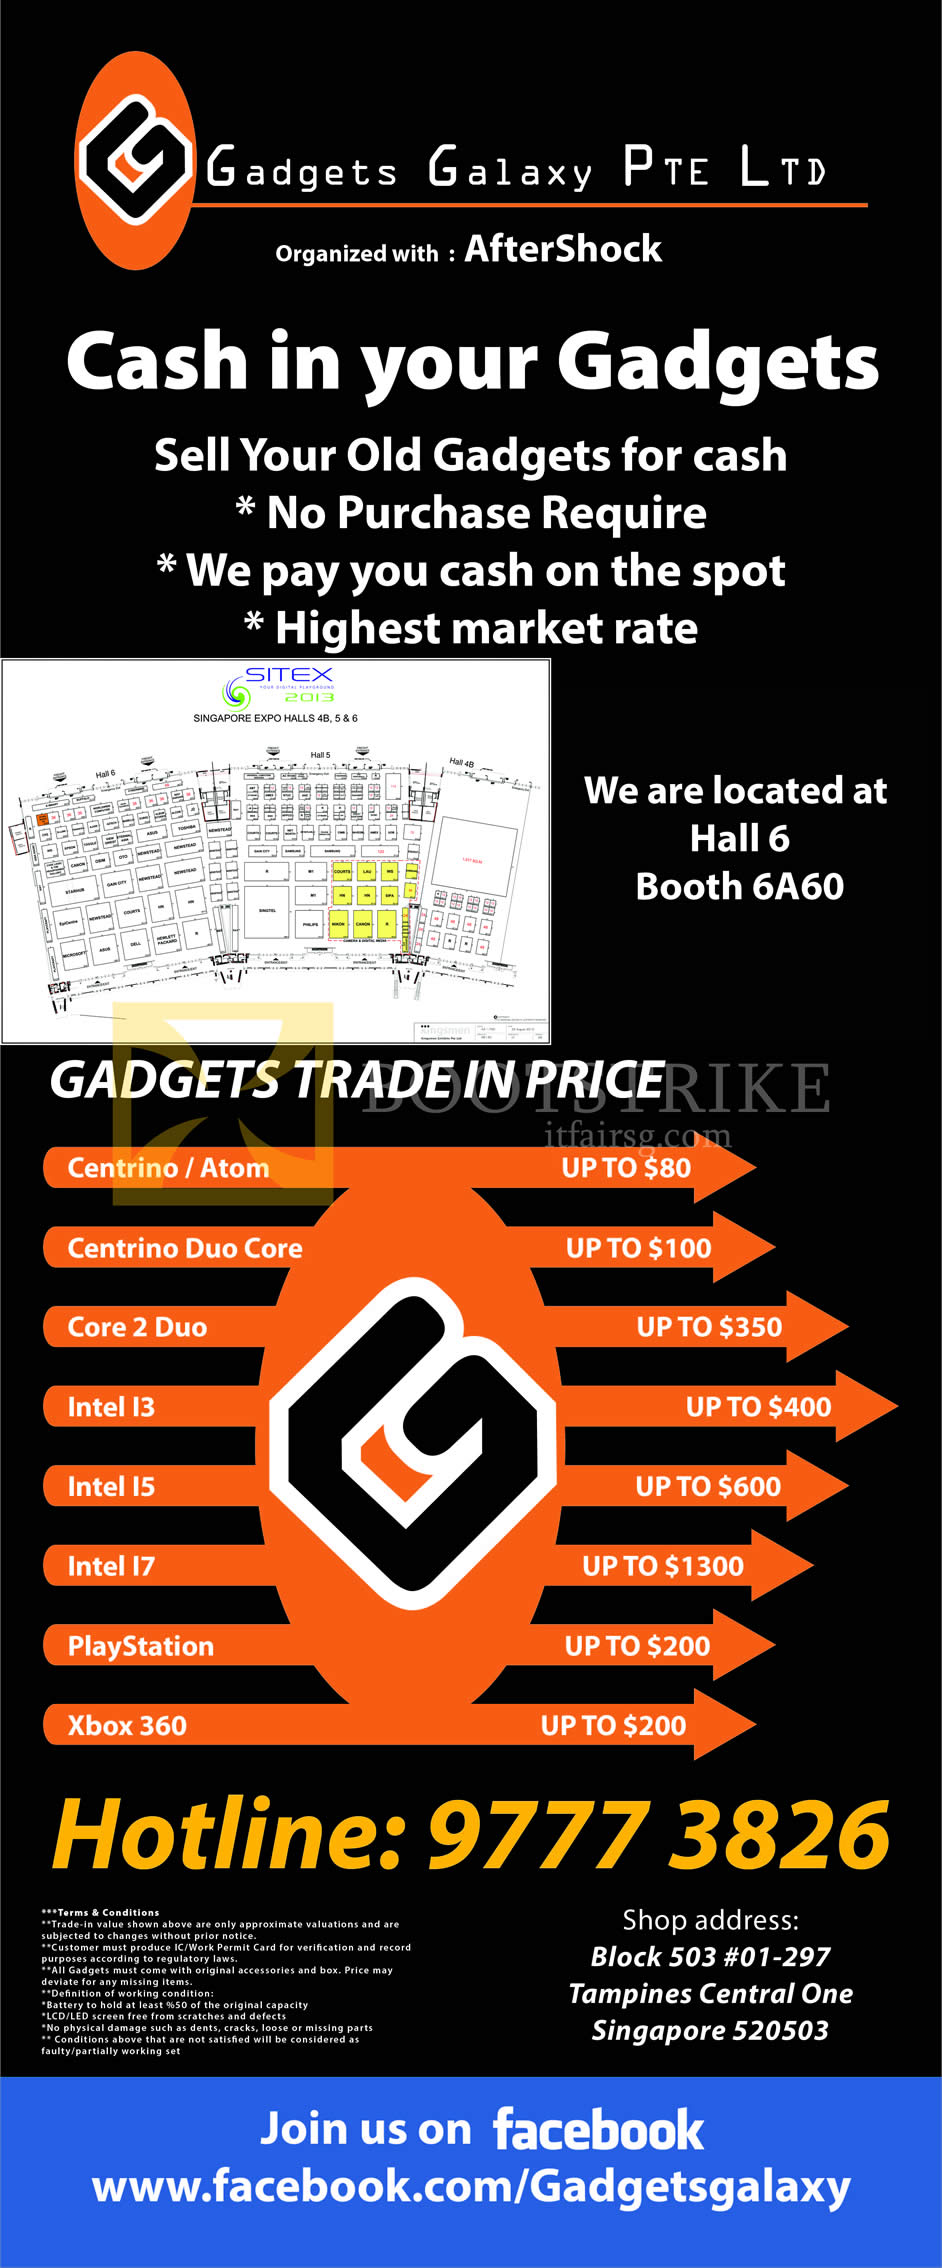 SITEX 2013 price list image brochure of Aftershock Gadgets Galaxy Trade In Notebooks, PlayStation, Xbox 360